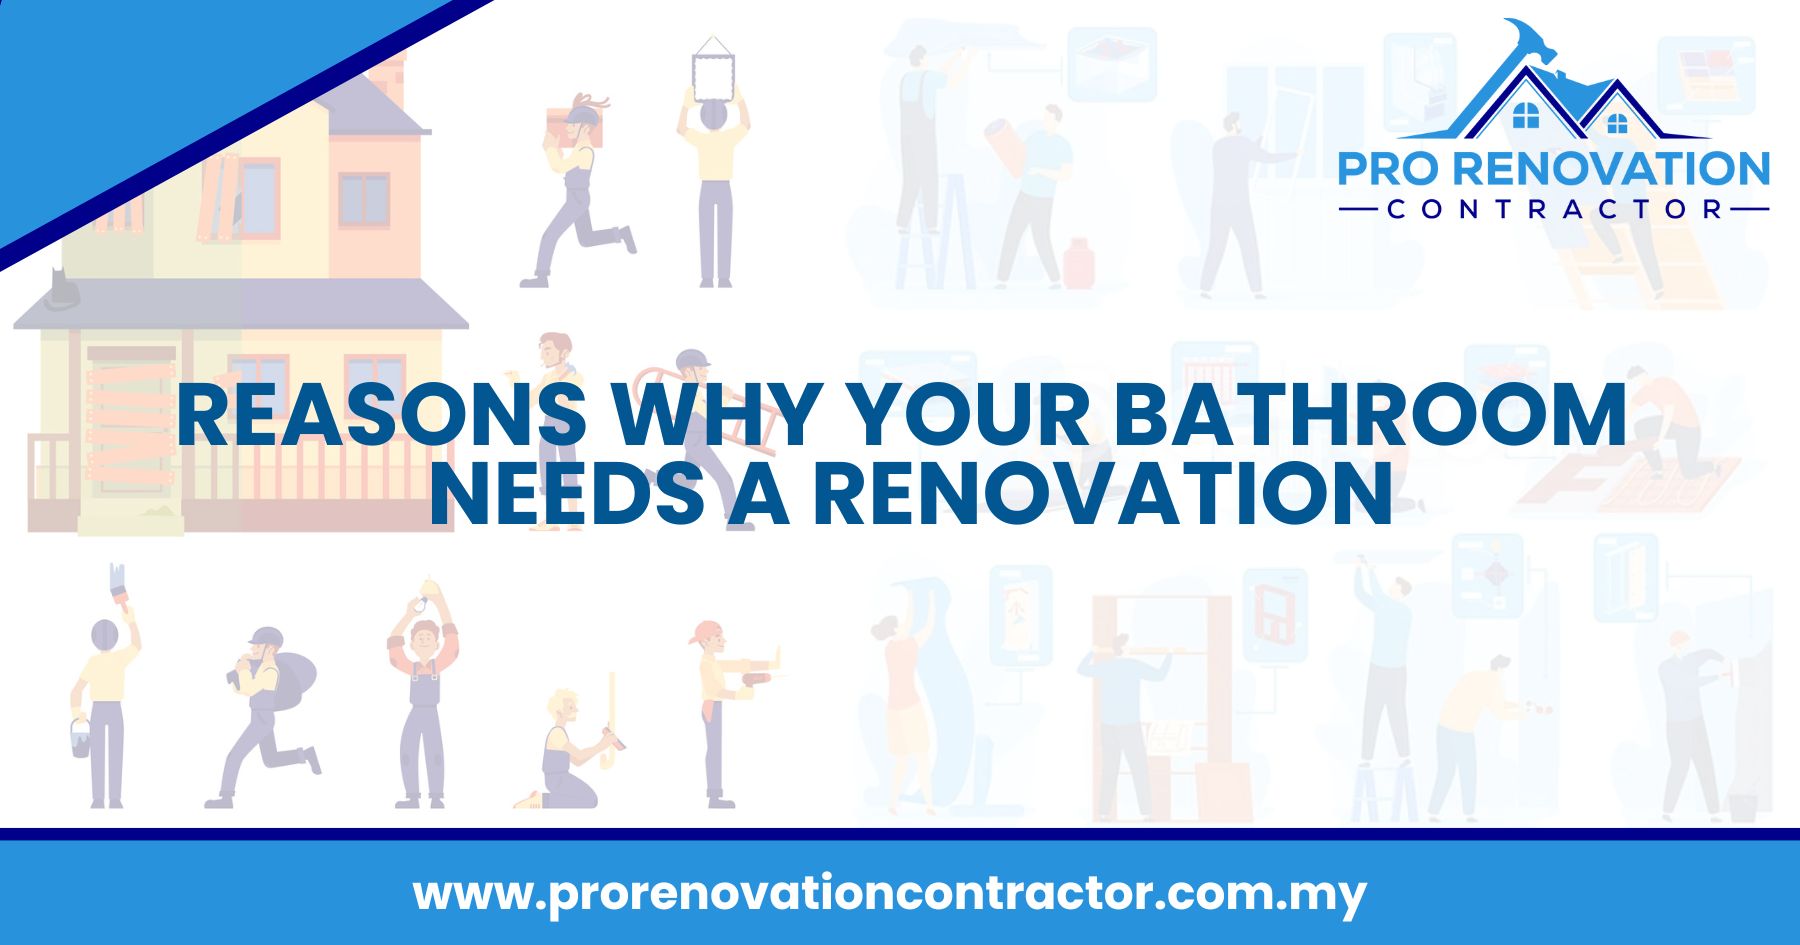 Reasons Why Your Bathroom Needs a Renovation